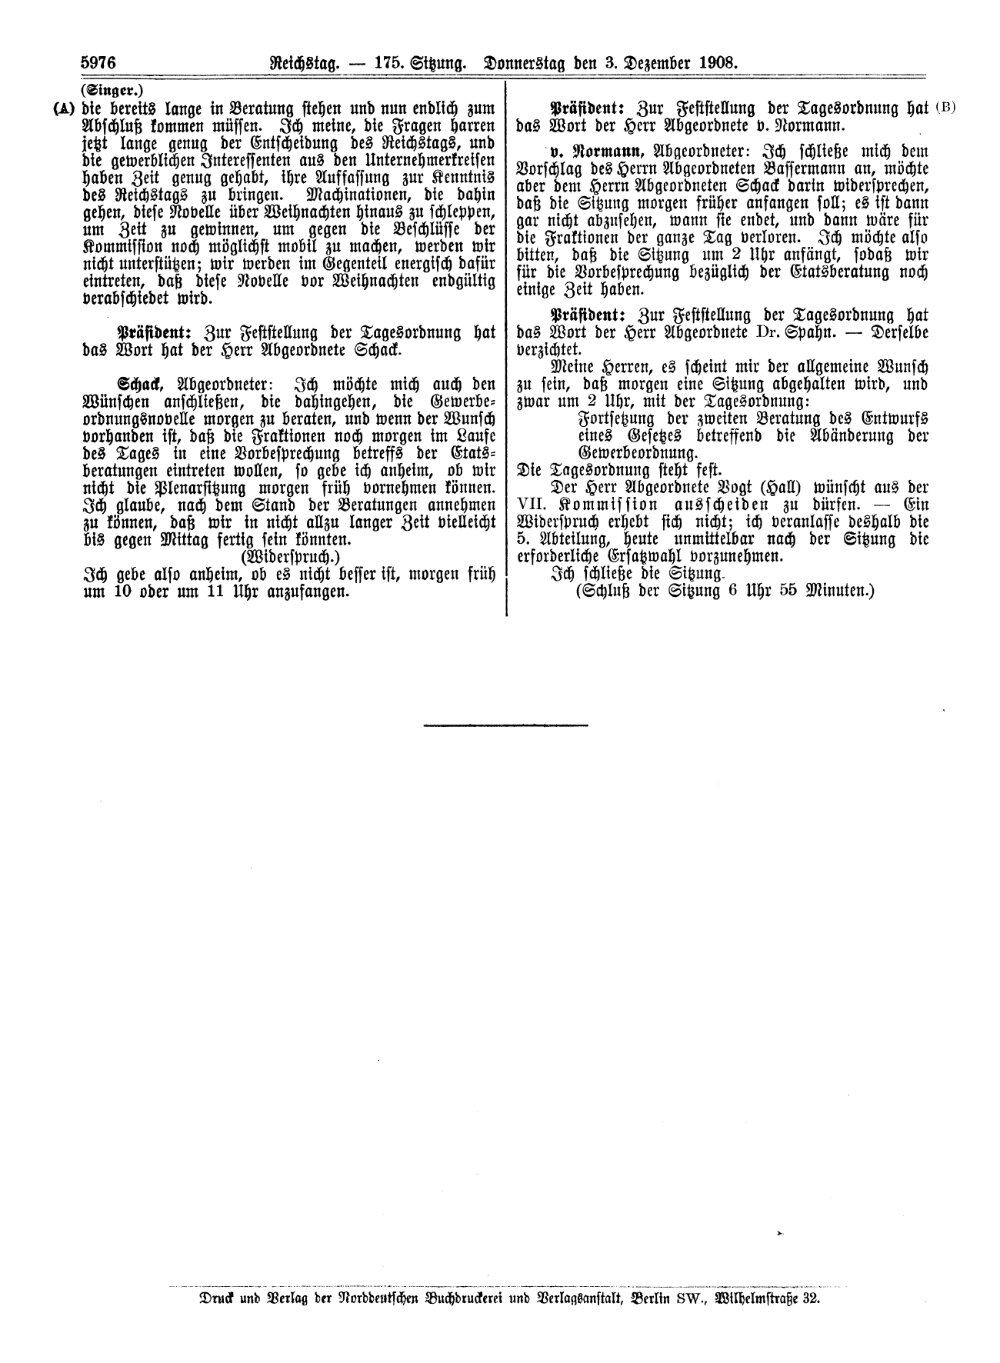 Scan of page 5976